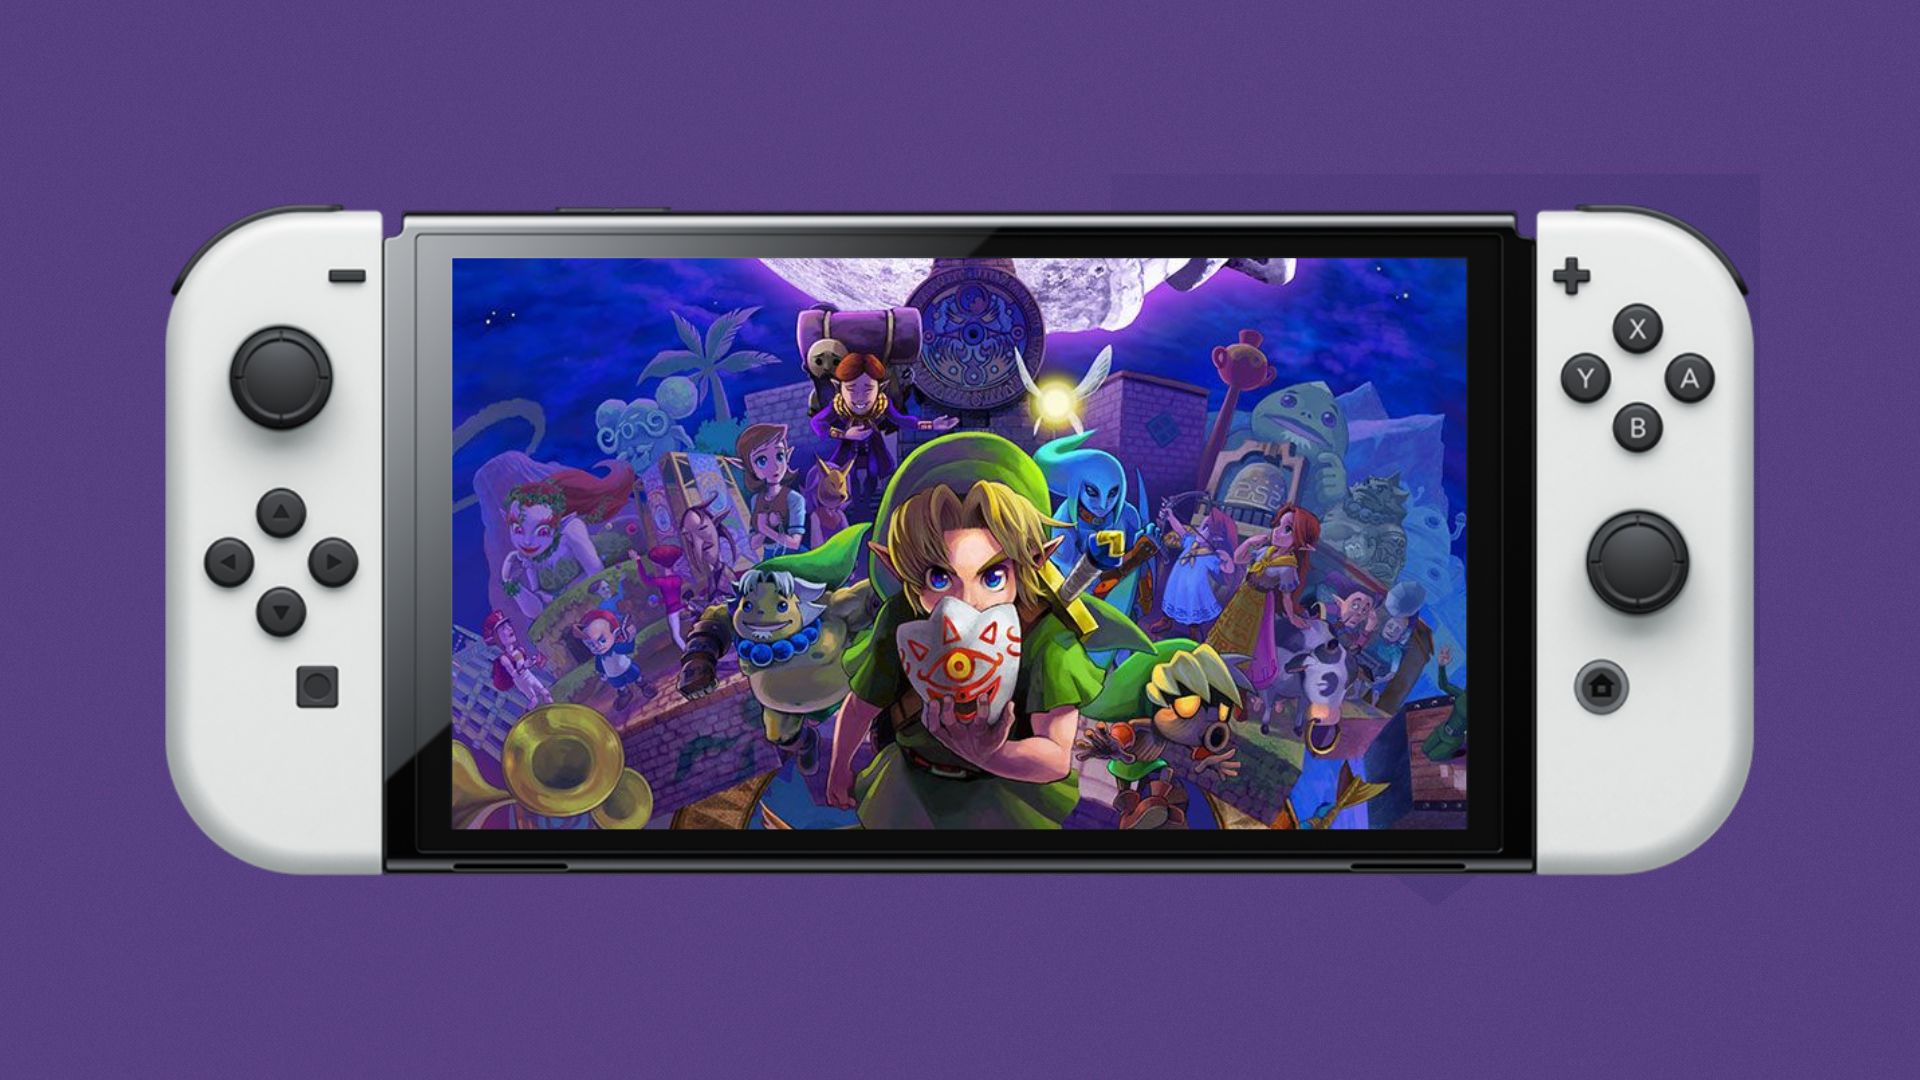 Zelda: Majora's Mask Is A Testament To What Nintendo Is Capable Of